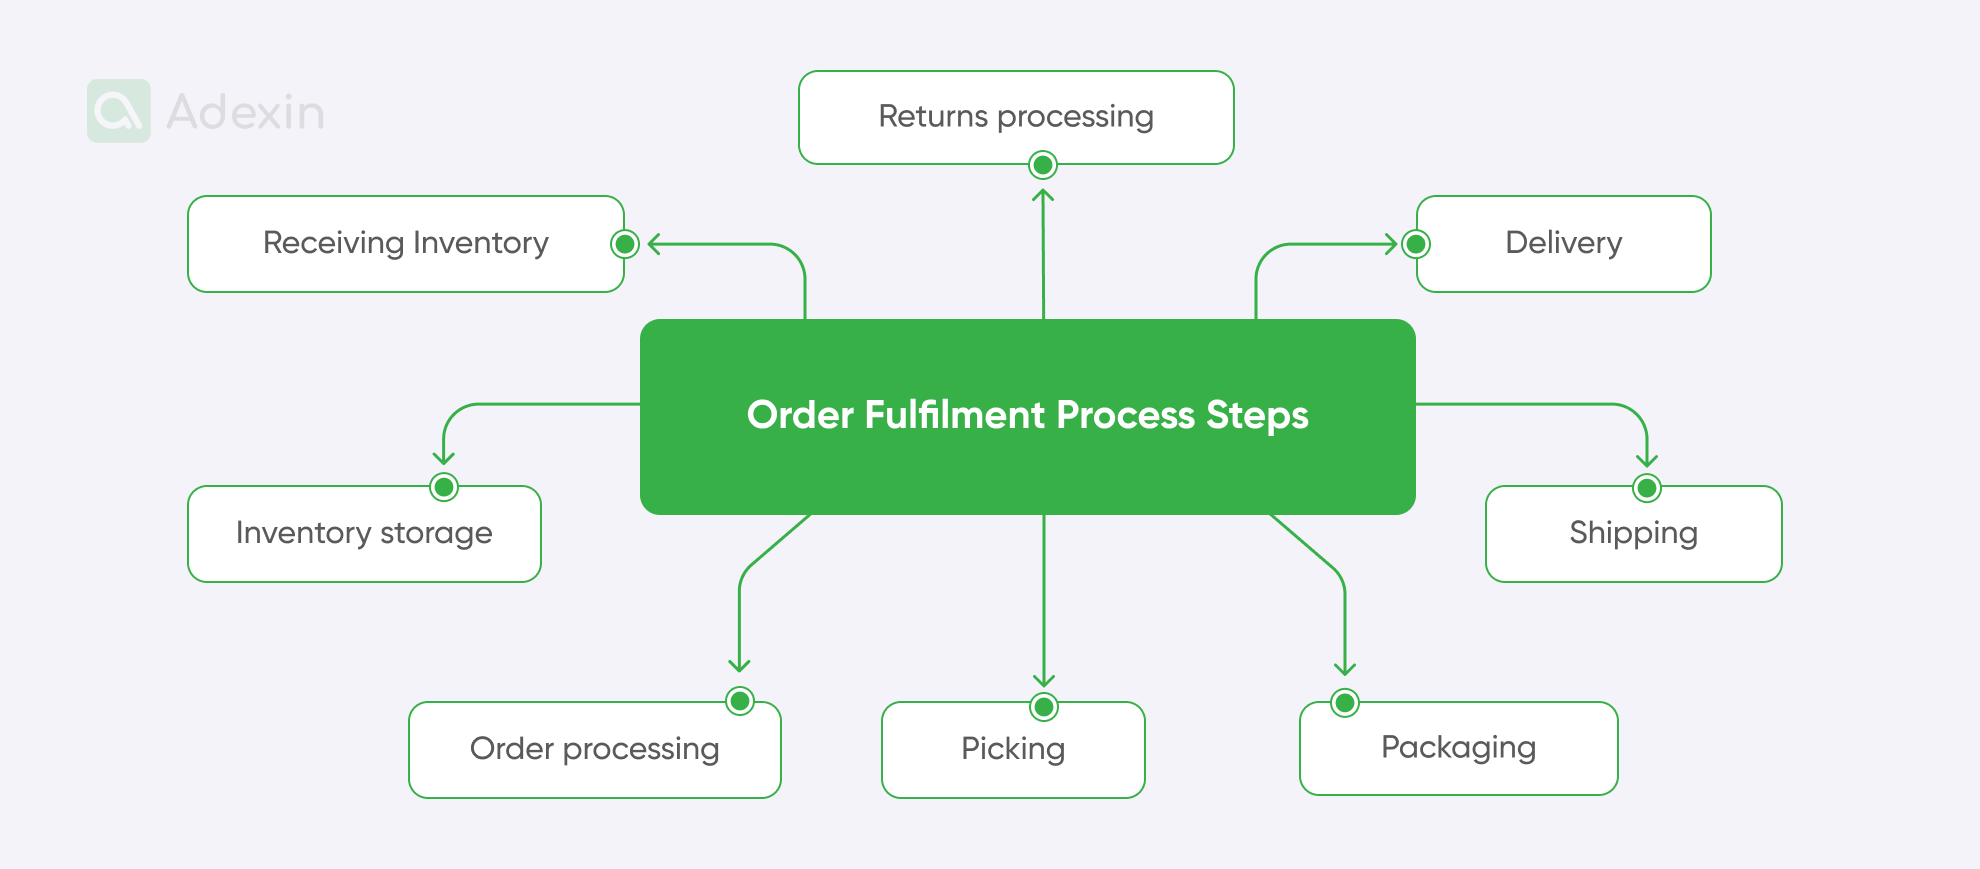 WMS participation in the process of order fulfillment